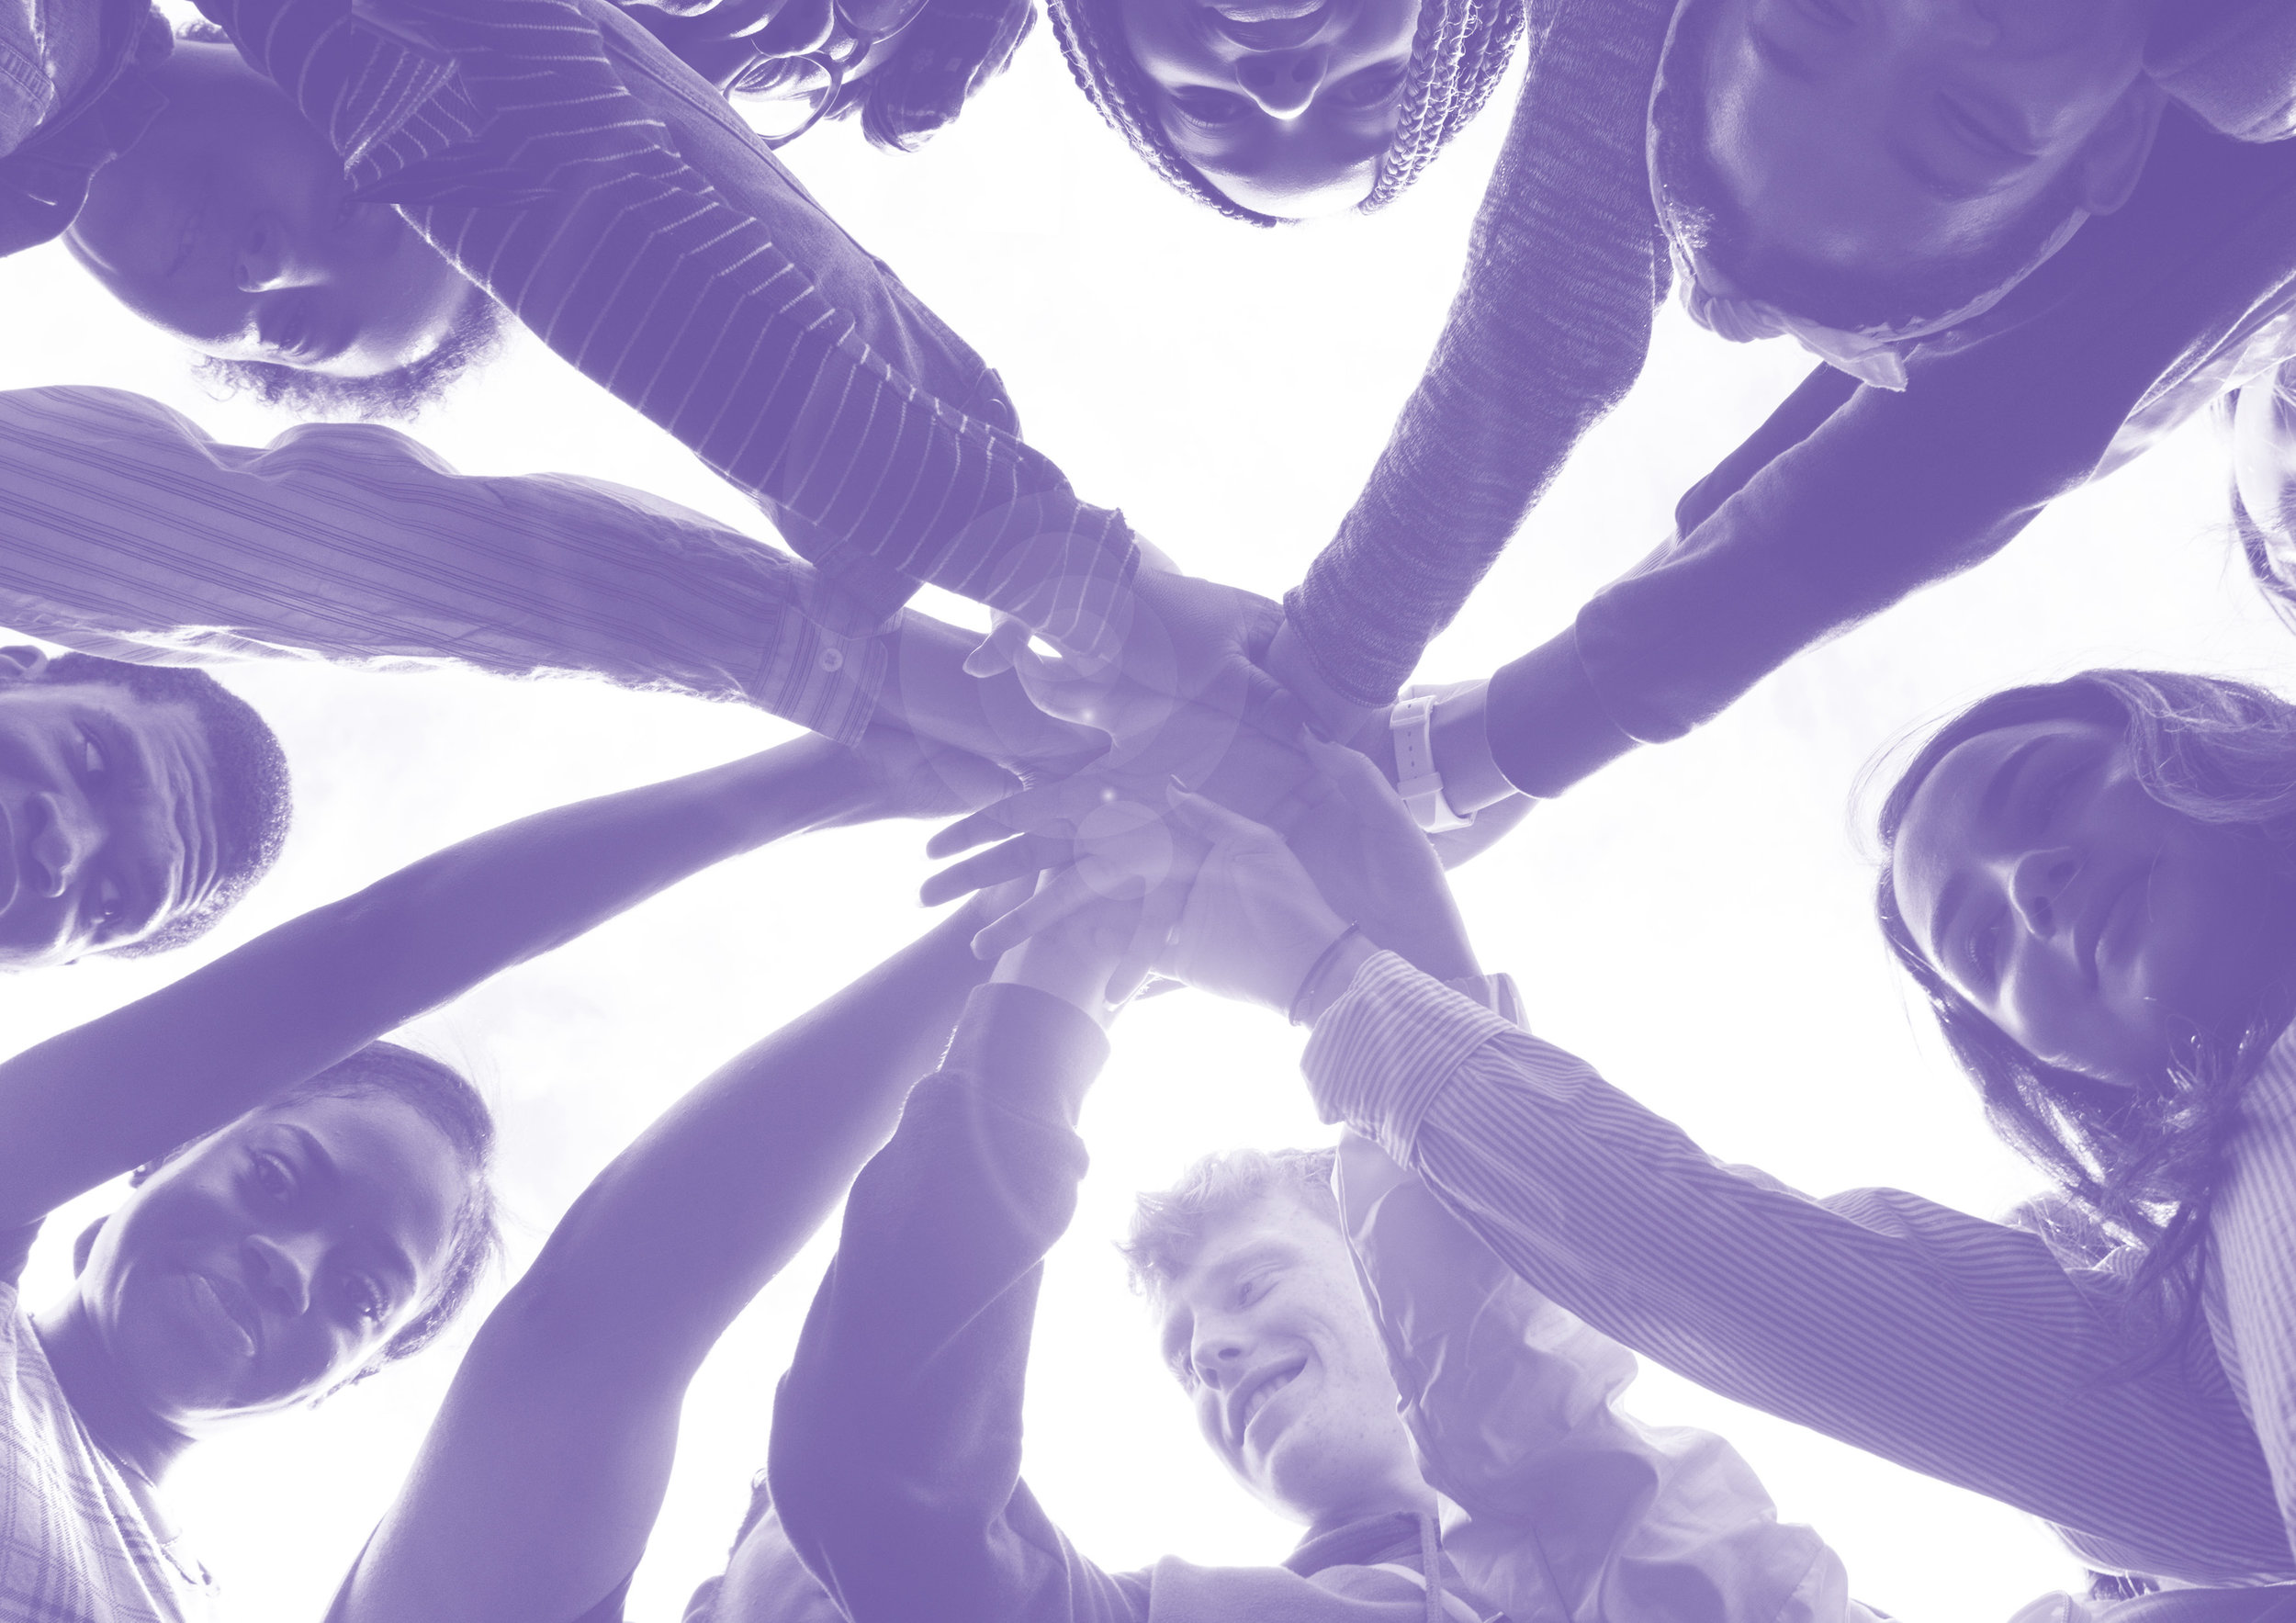 Bottom view of a team in a huddle with hands stacked together